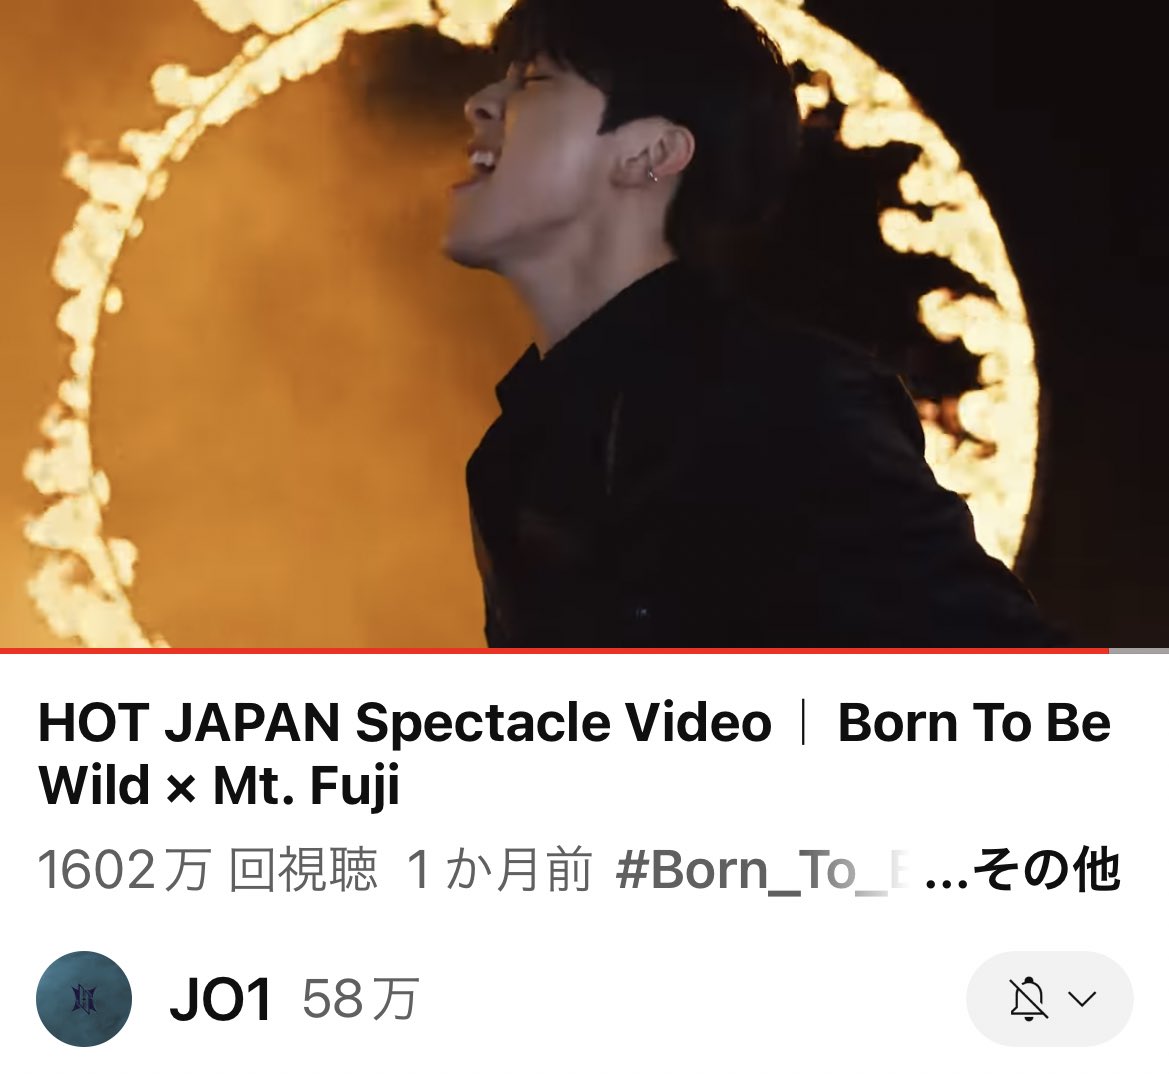 .ﾟ･*..*･ﾟ .ﾟ･*..*･ﾟ HOT JAPAN Spectacle Video｜Born To Be Wild × Mt. Fuji https://t.co/0T3Ei2BN0f @YouTubeより @official_jo1